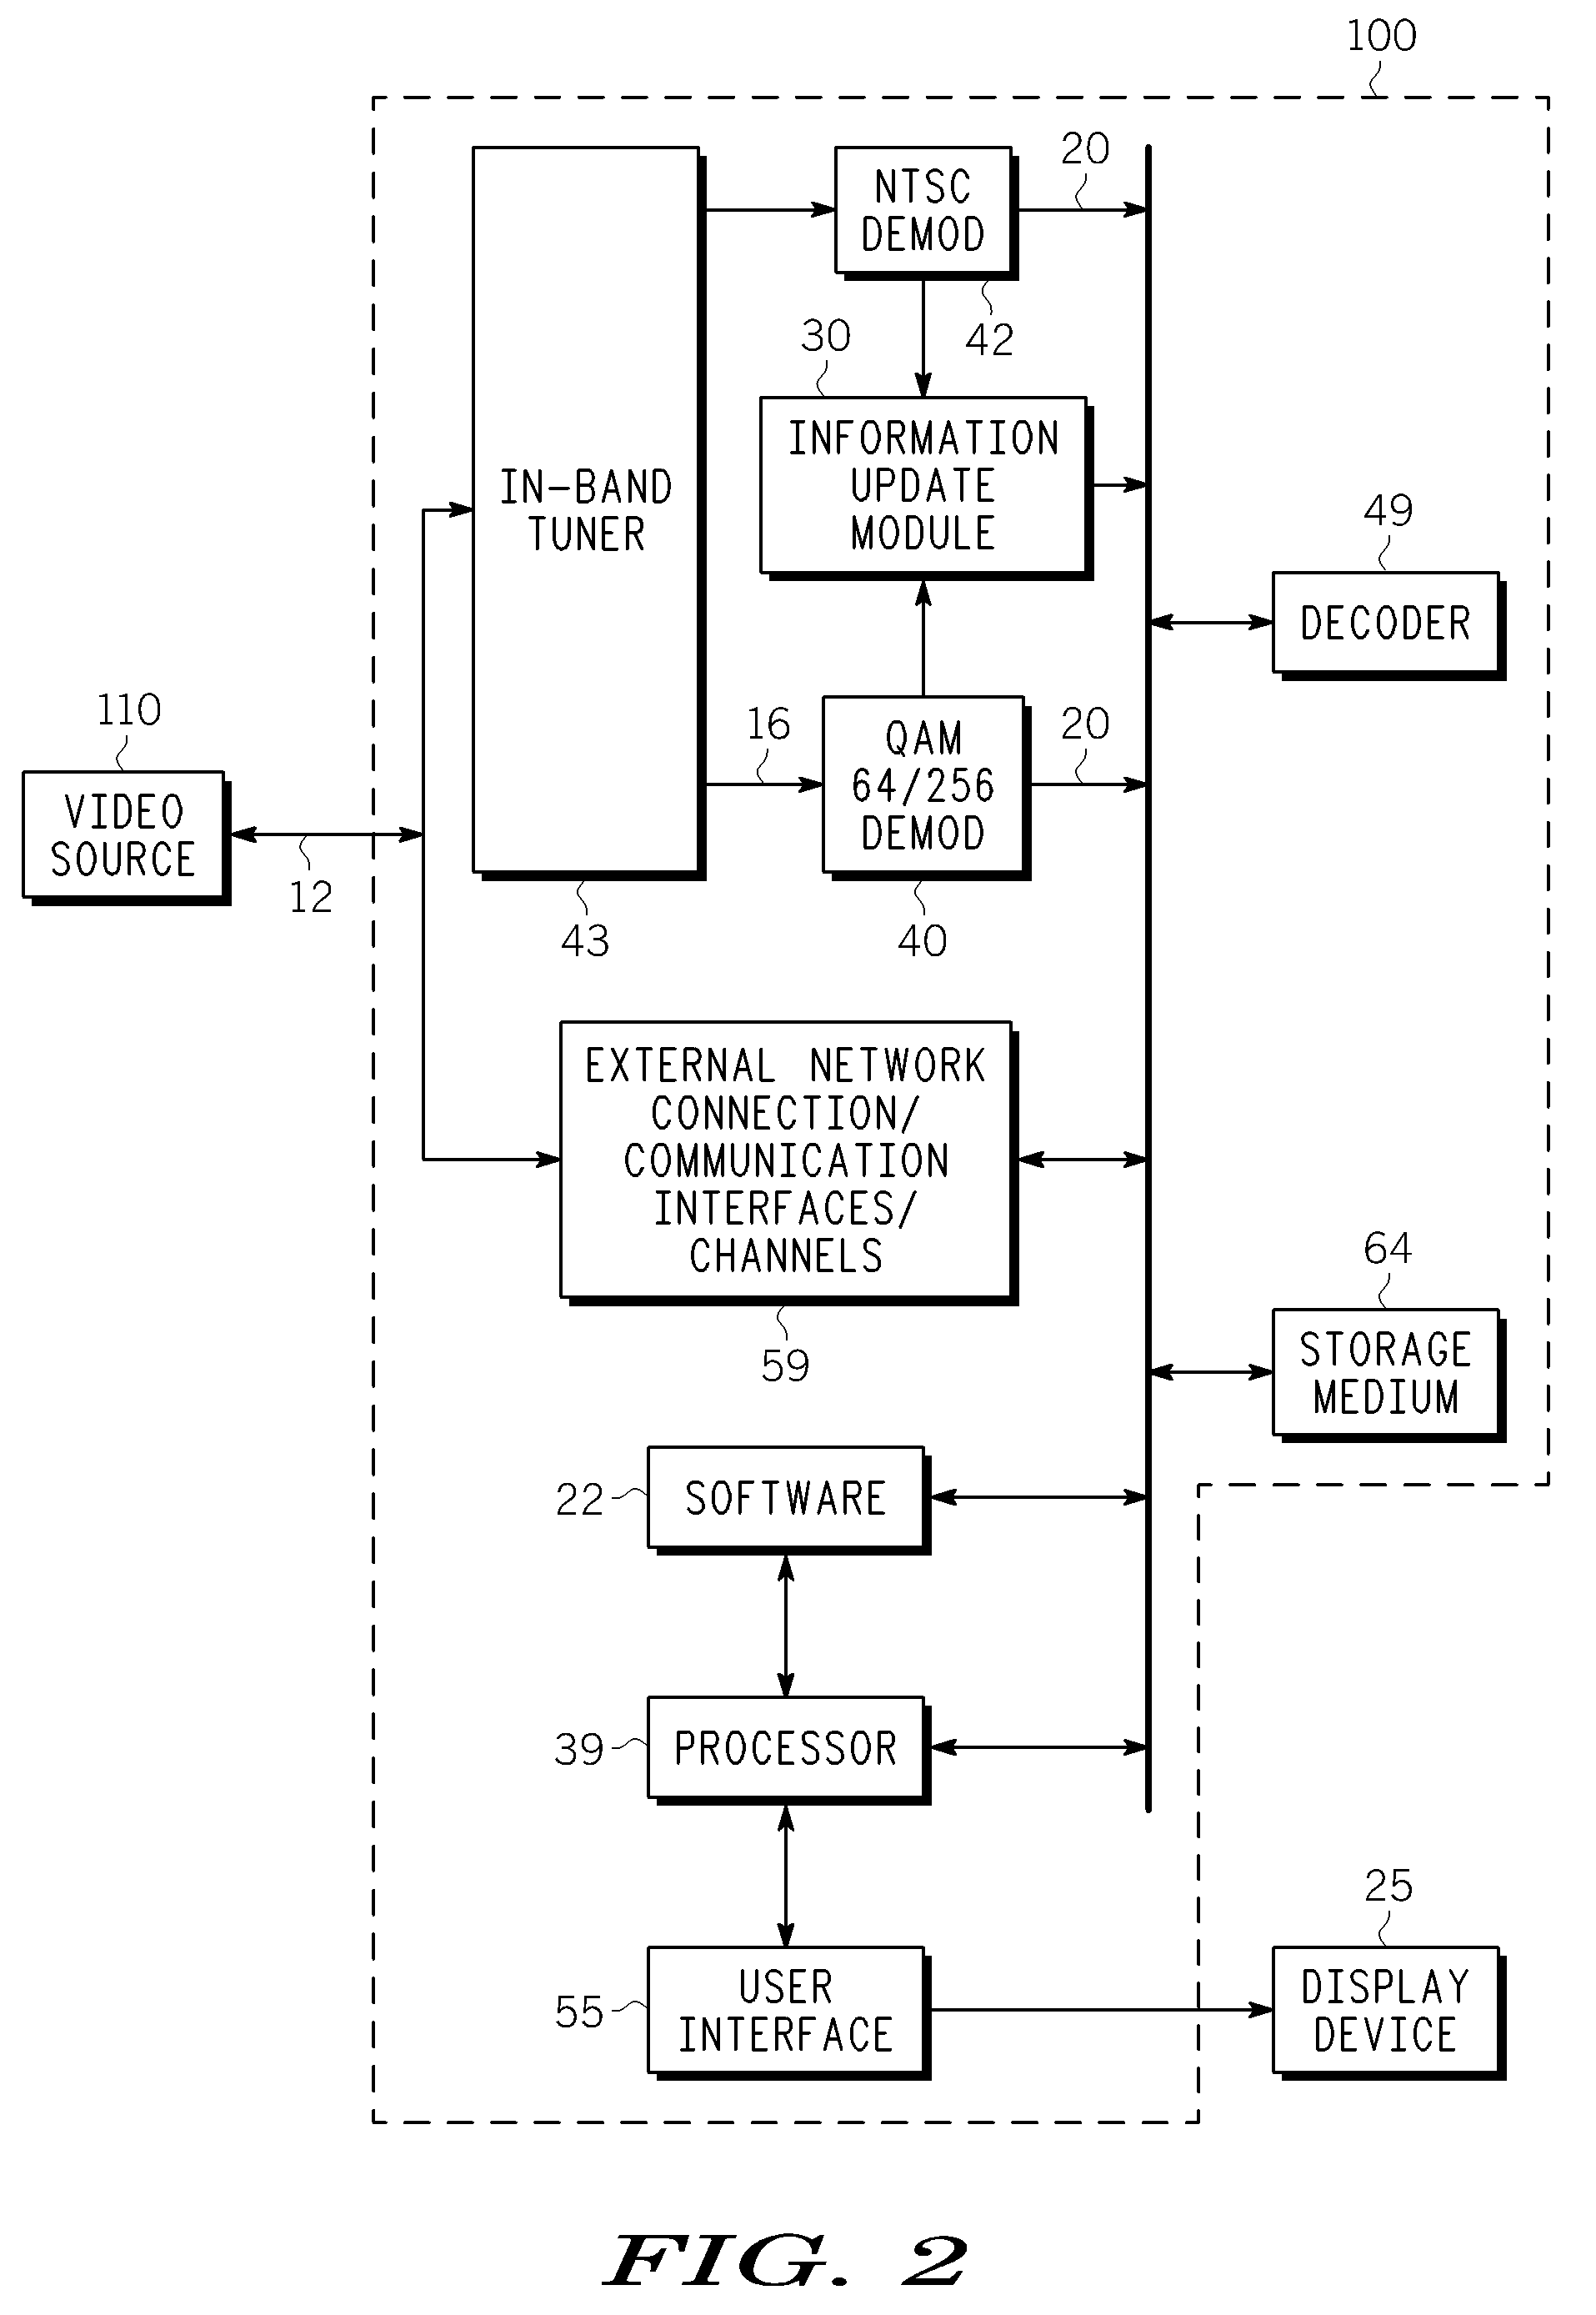 System and Method for Selecting and Viewing Broadcast Content Based on Syndication Streams